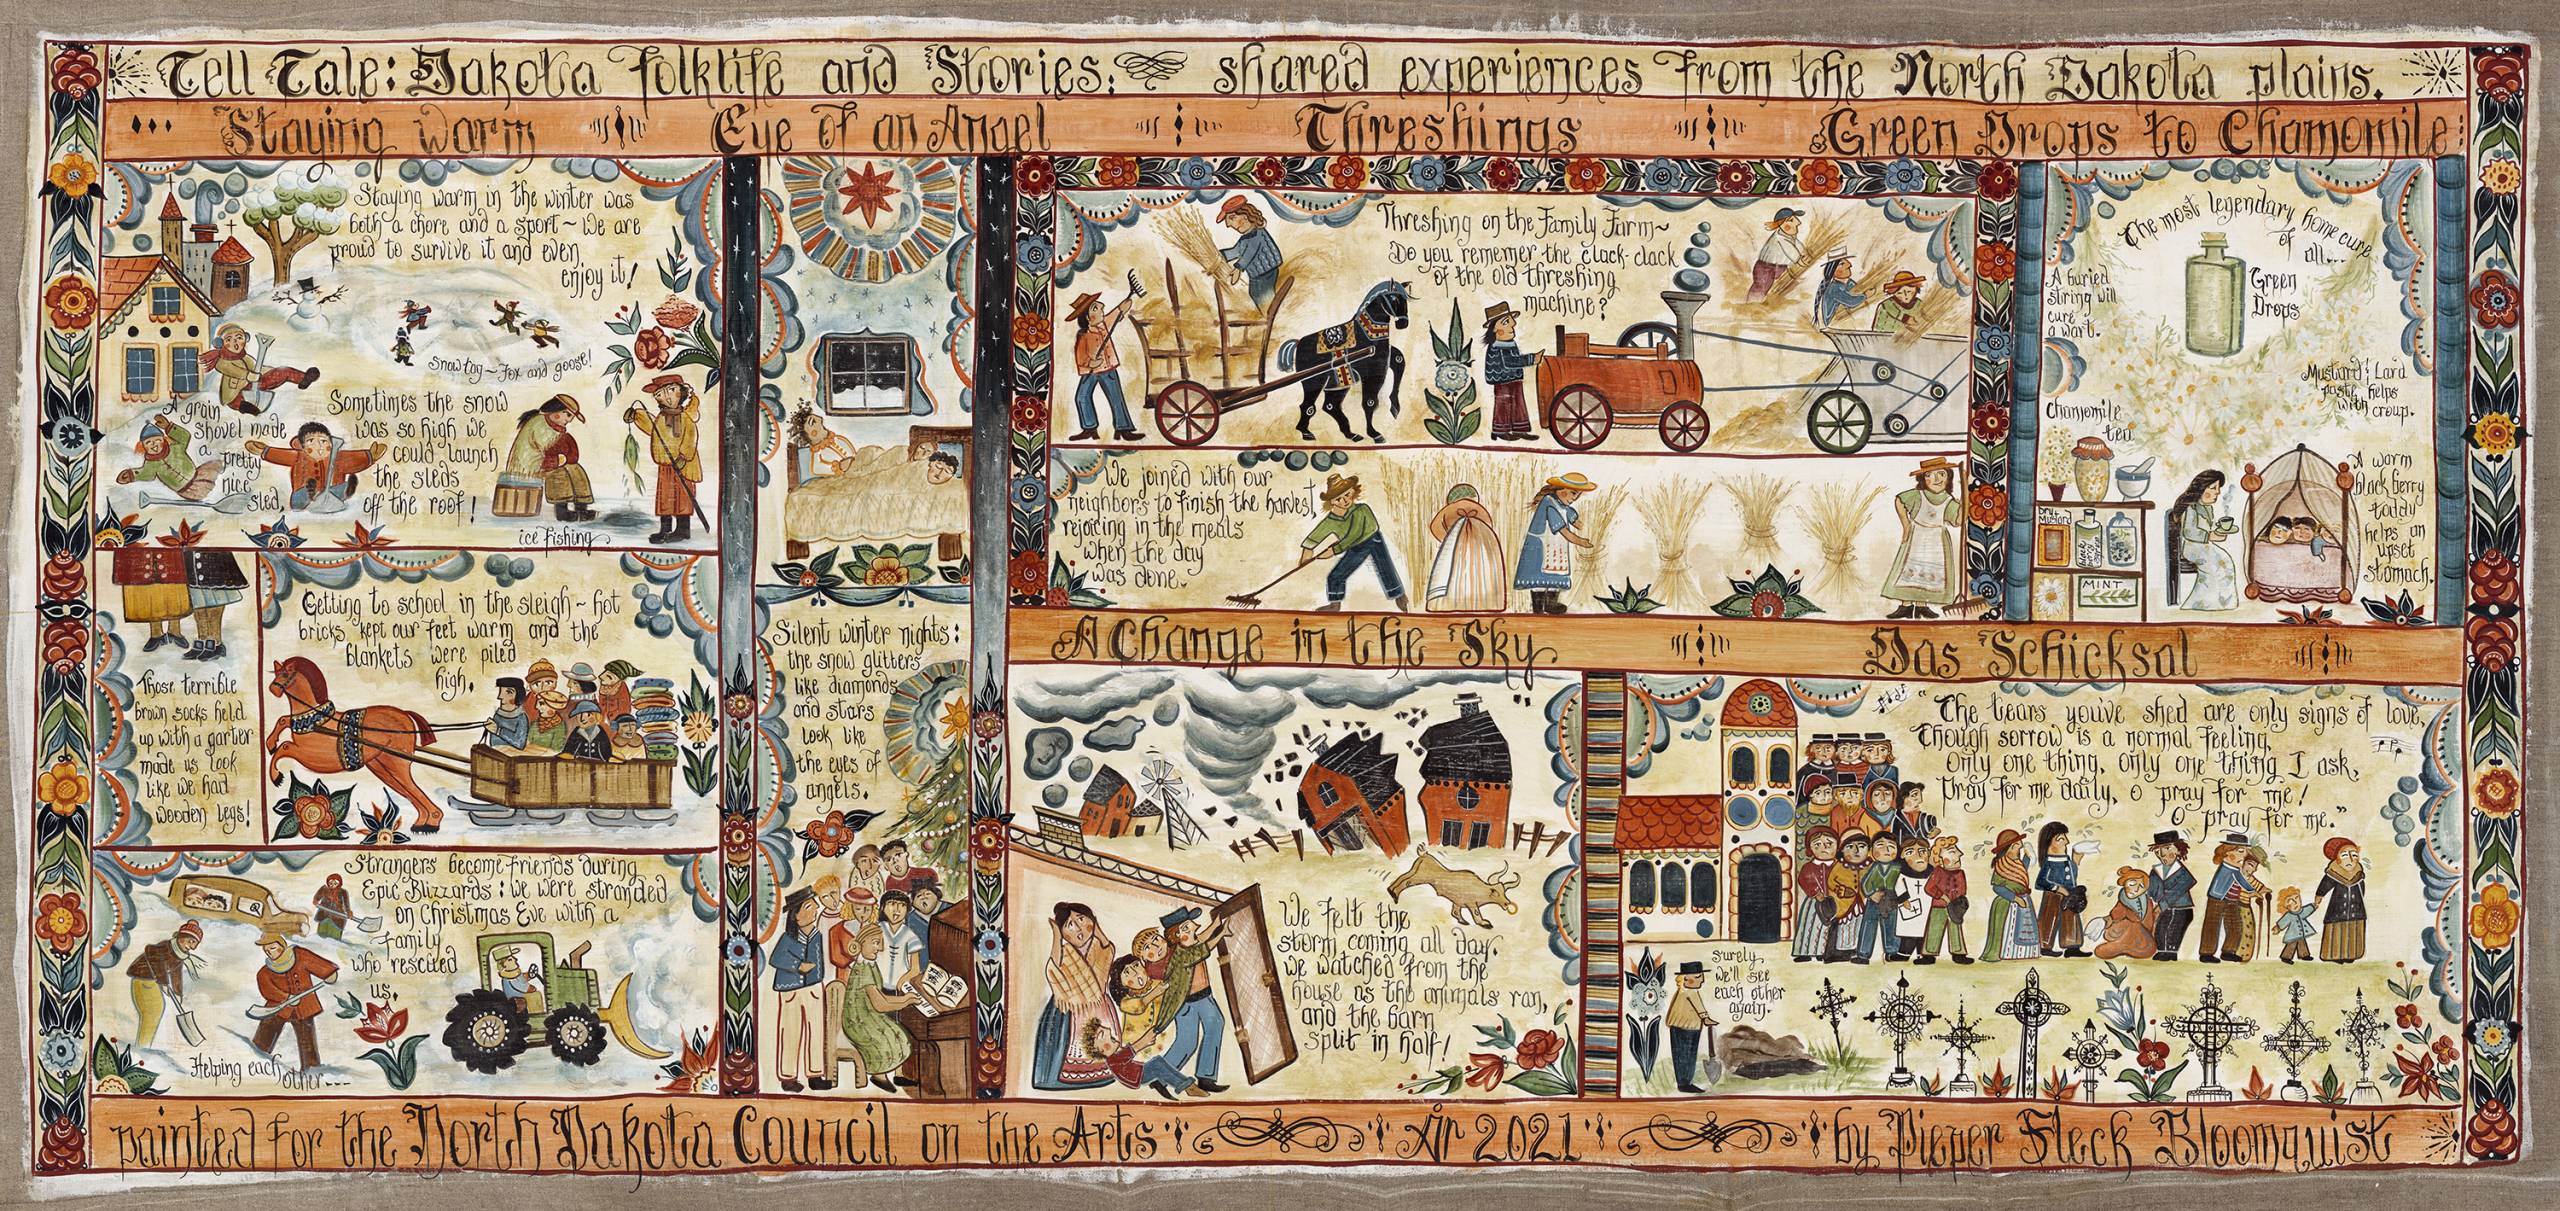 artist Pieper Bloomquist created this Swedish bonadsmålning painting depicting six different lores of life in rural North Dakota, including threshing, snow storms, tornadoes, church, babies, bedtime, etc.